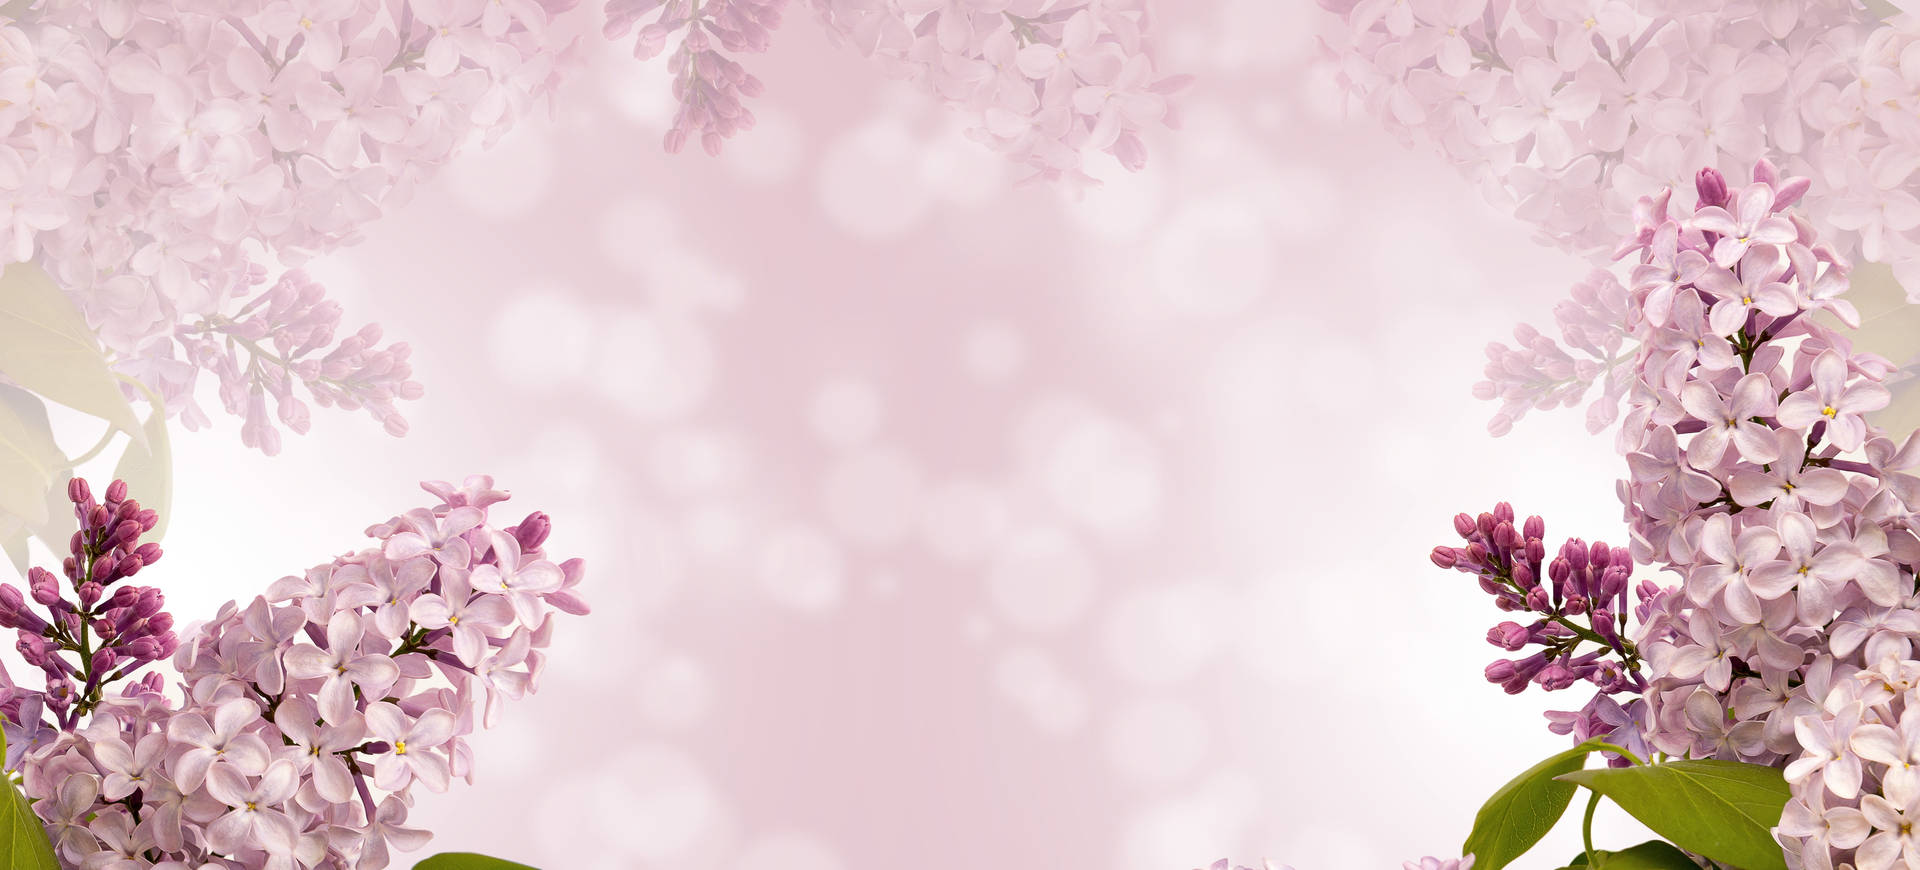 Background Design With Pink Flowers Wallpaper